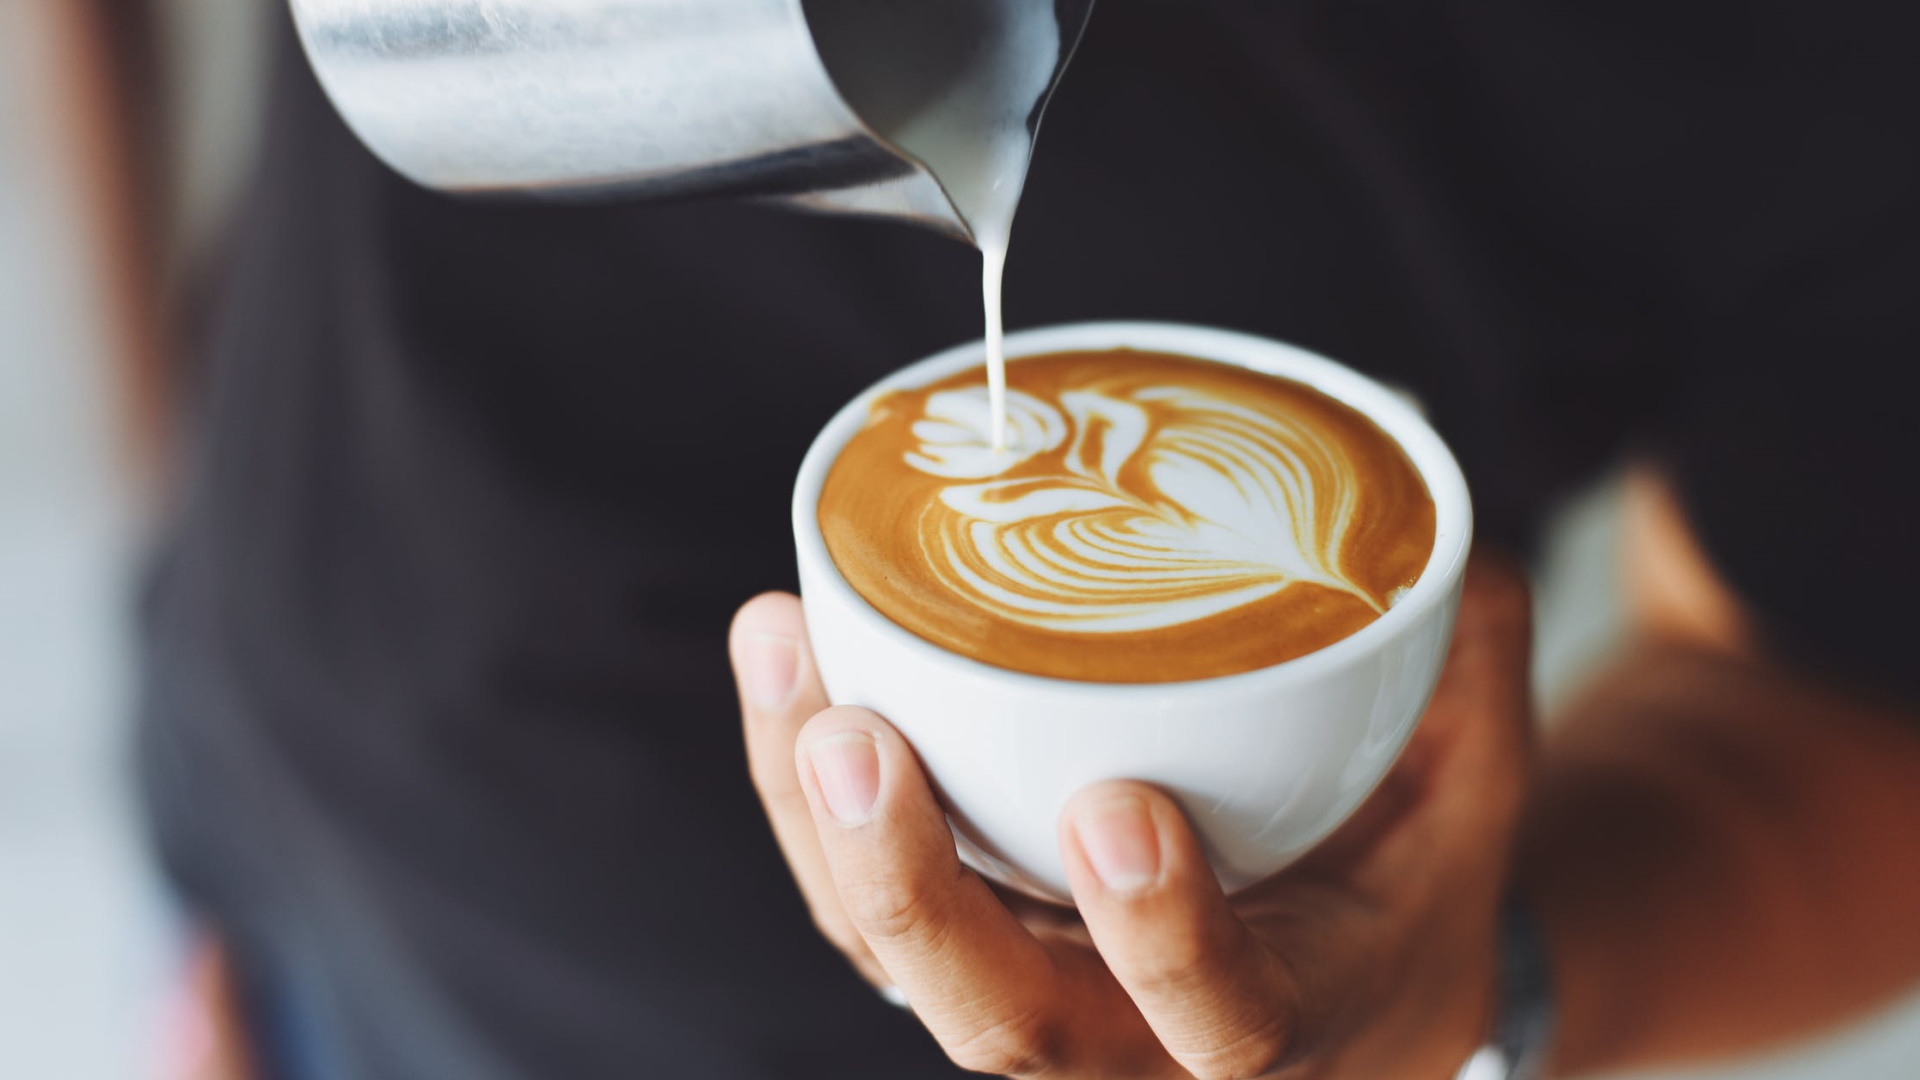 A person pours milk into a coffee